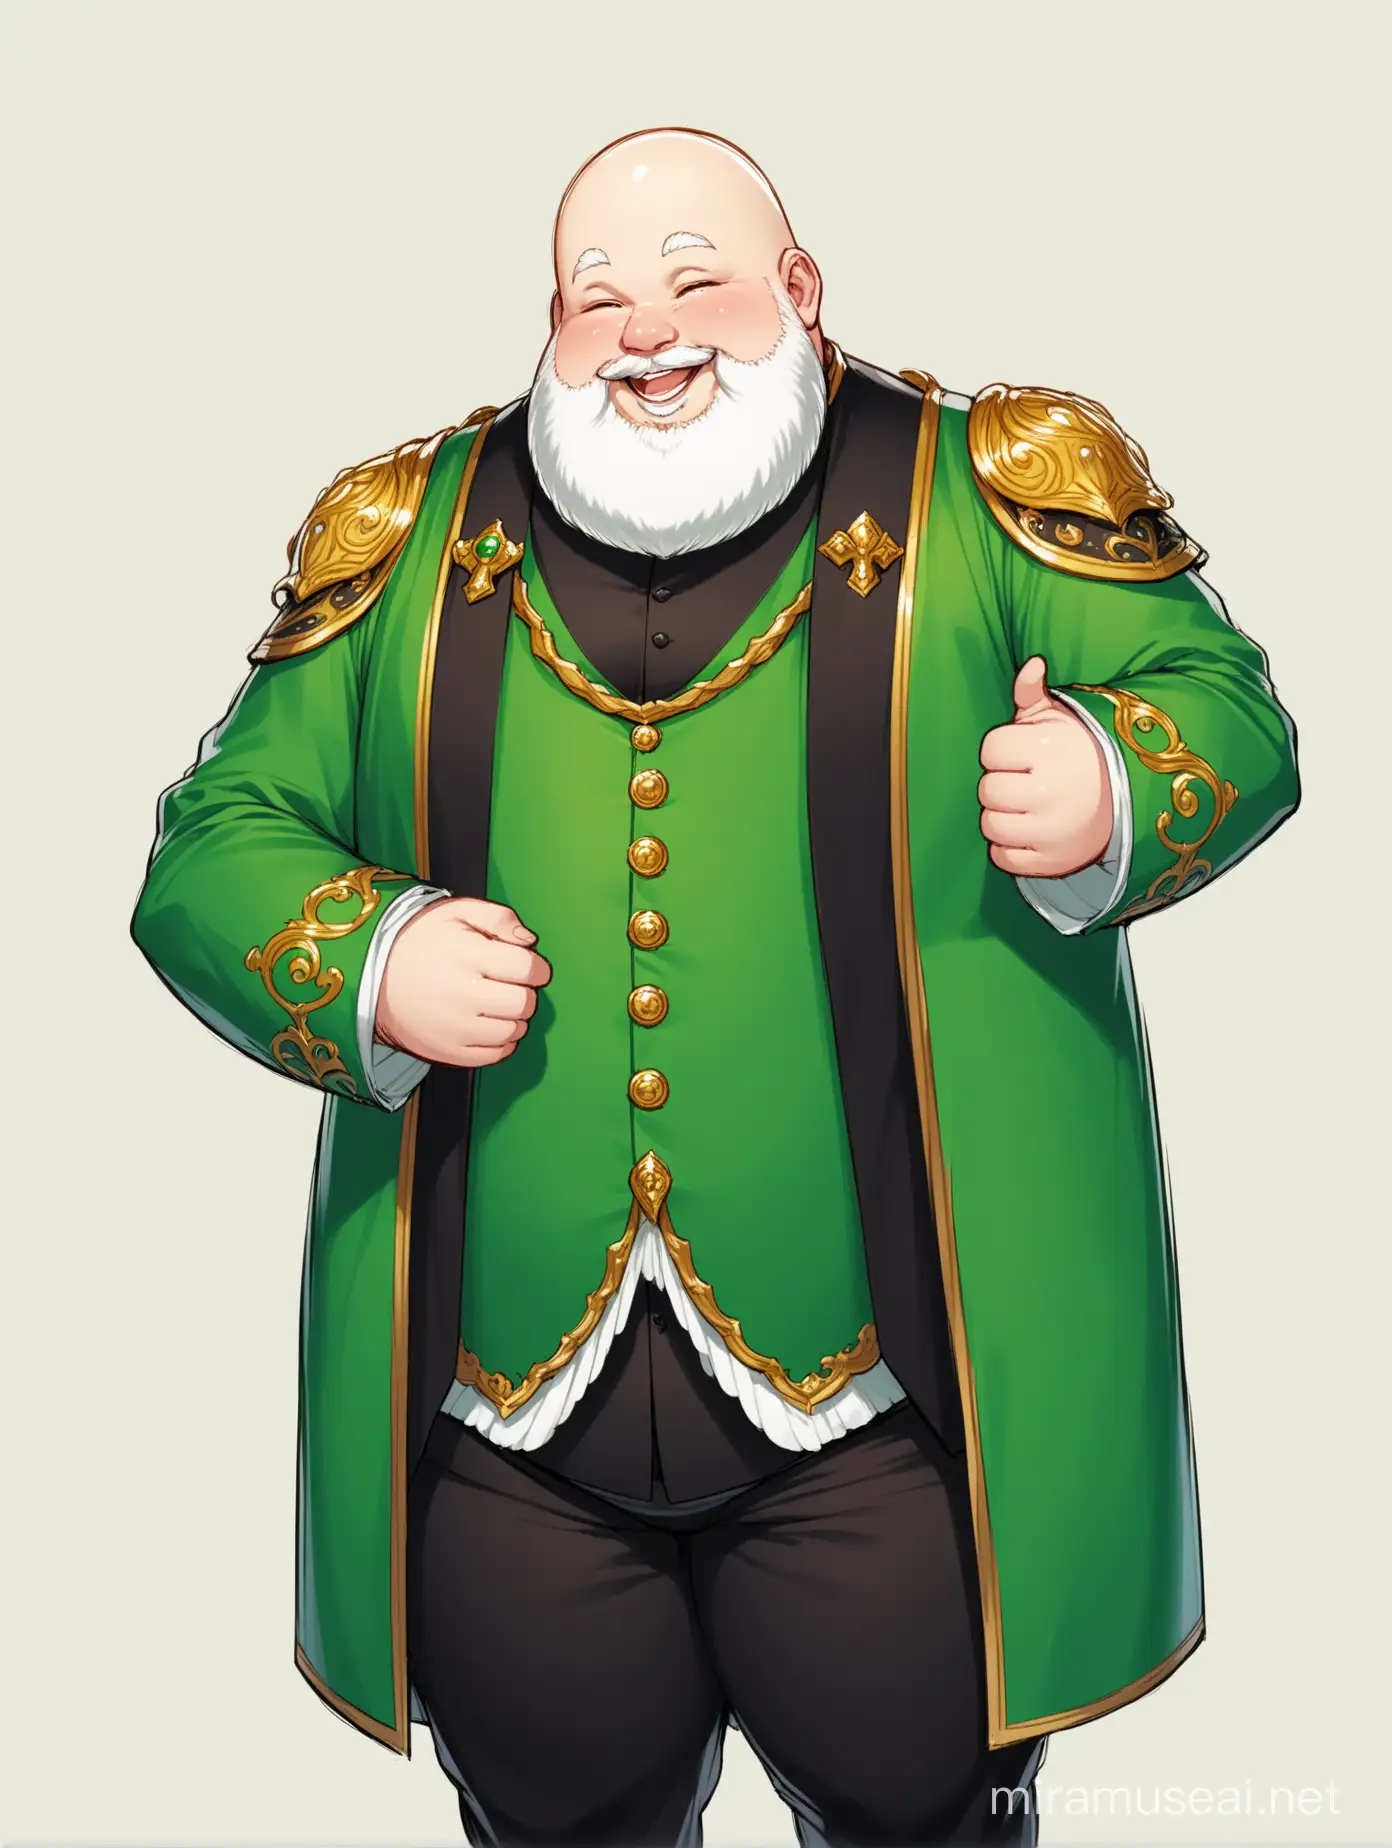 A chubby man with no hair and a white beard, he is wearing a green and black fantasy nobleman suit. he looks jolly 